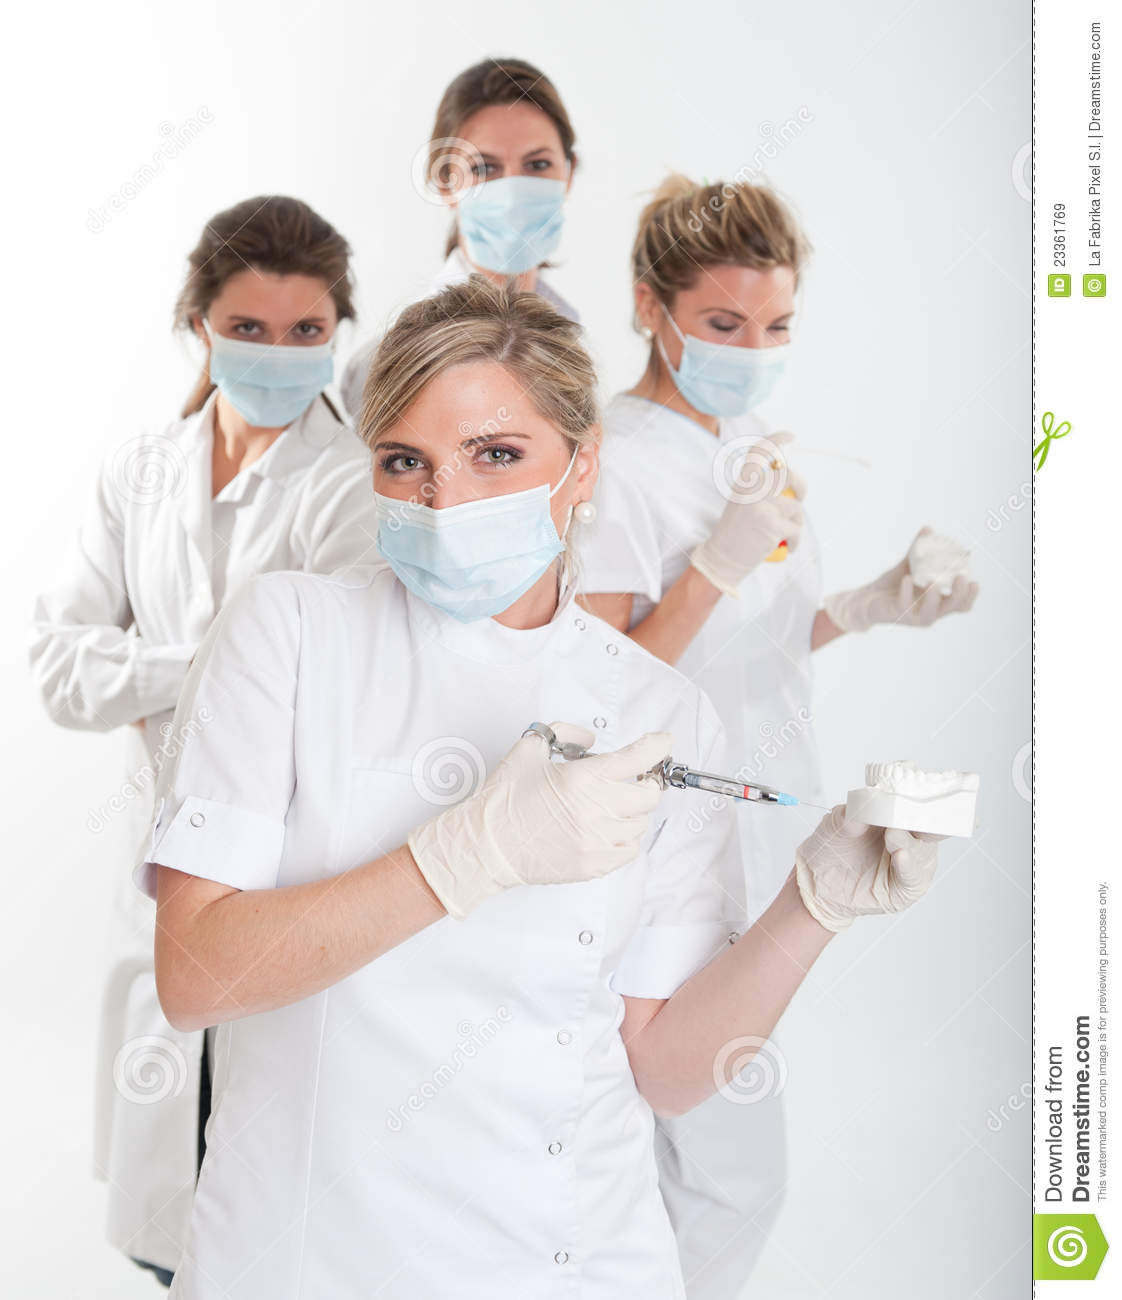 Four Female Dentists Posing With Masks And Equipment